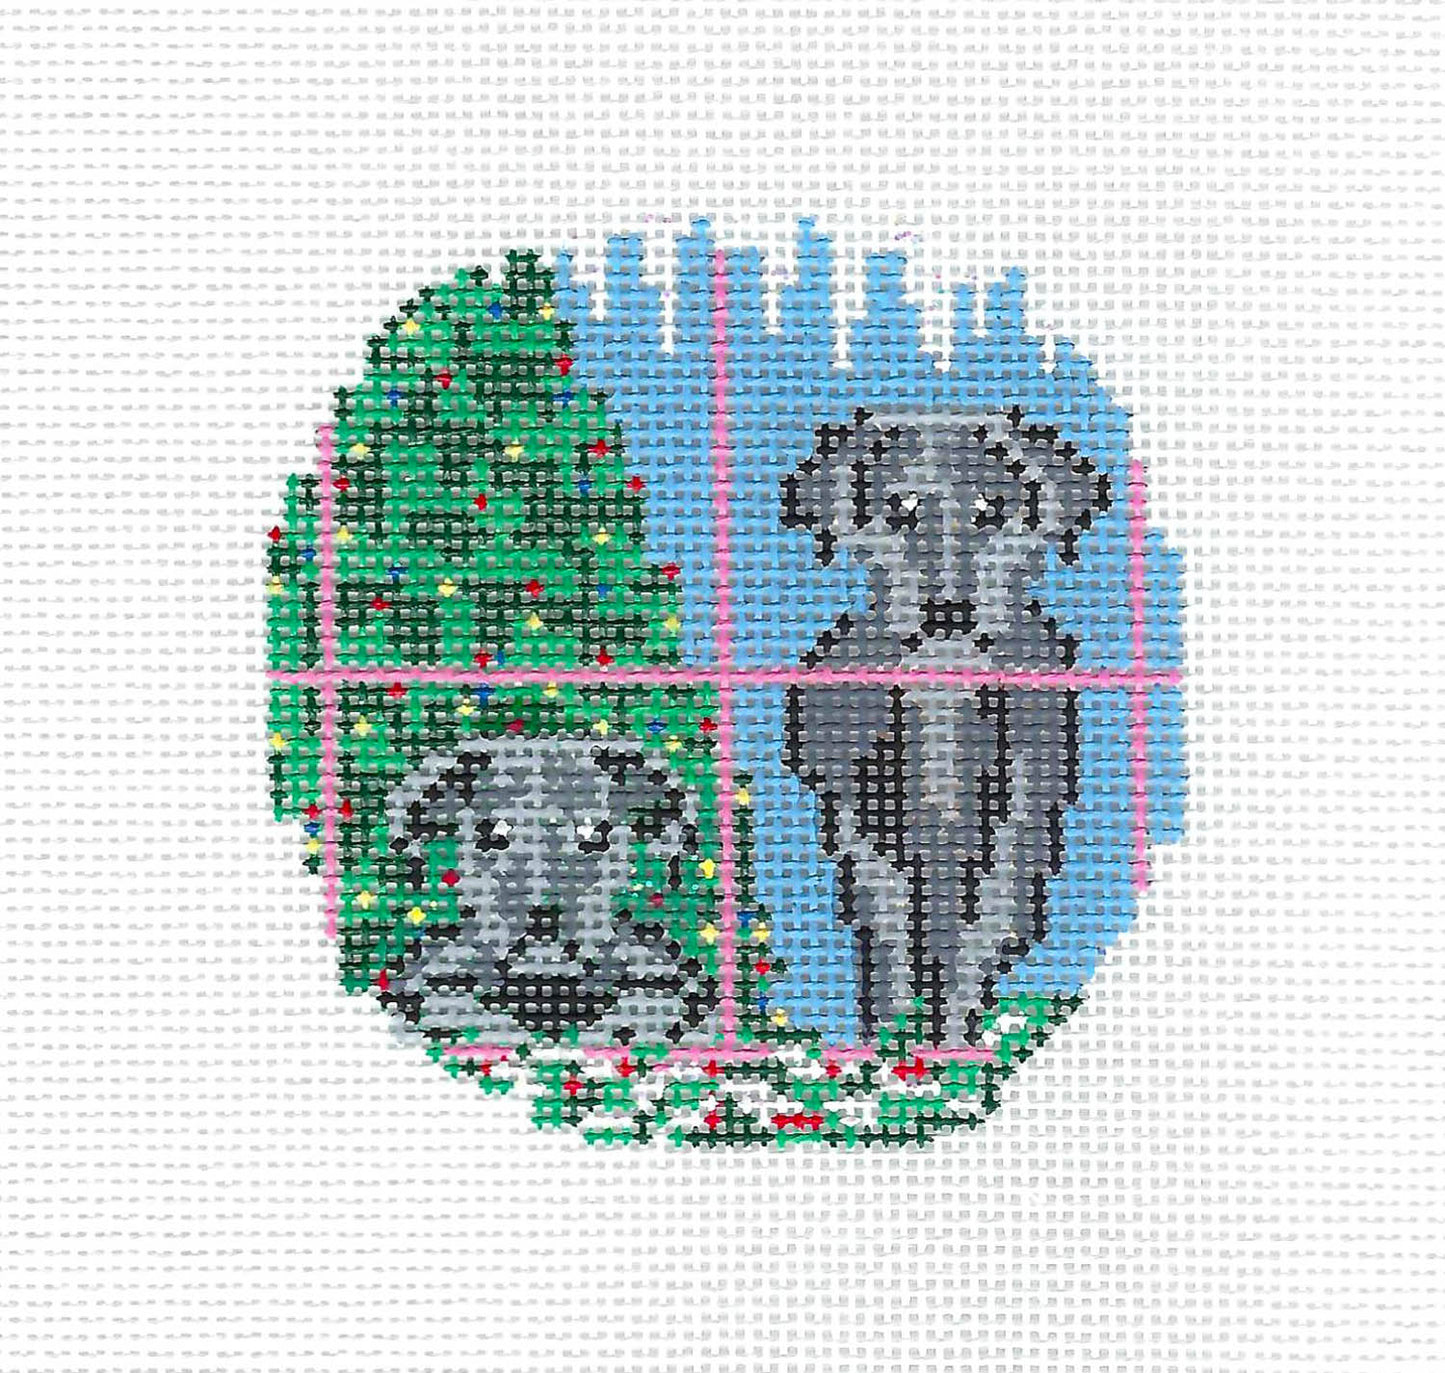 Dog Round ~ 2 Black Lab Dogs 3" Ornament handpainted Needlepoint Canvas Needle Crossings